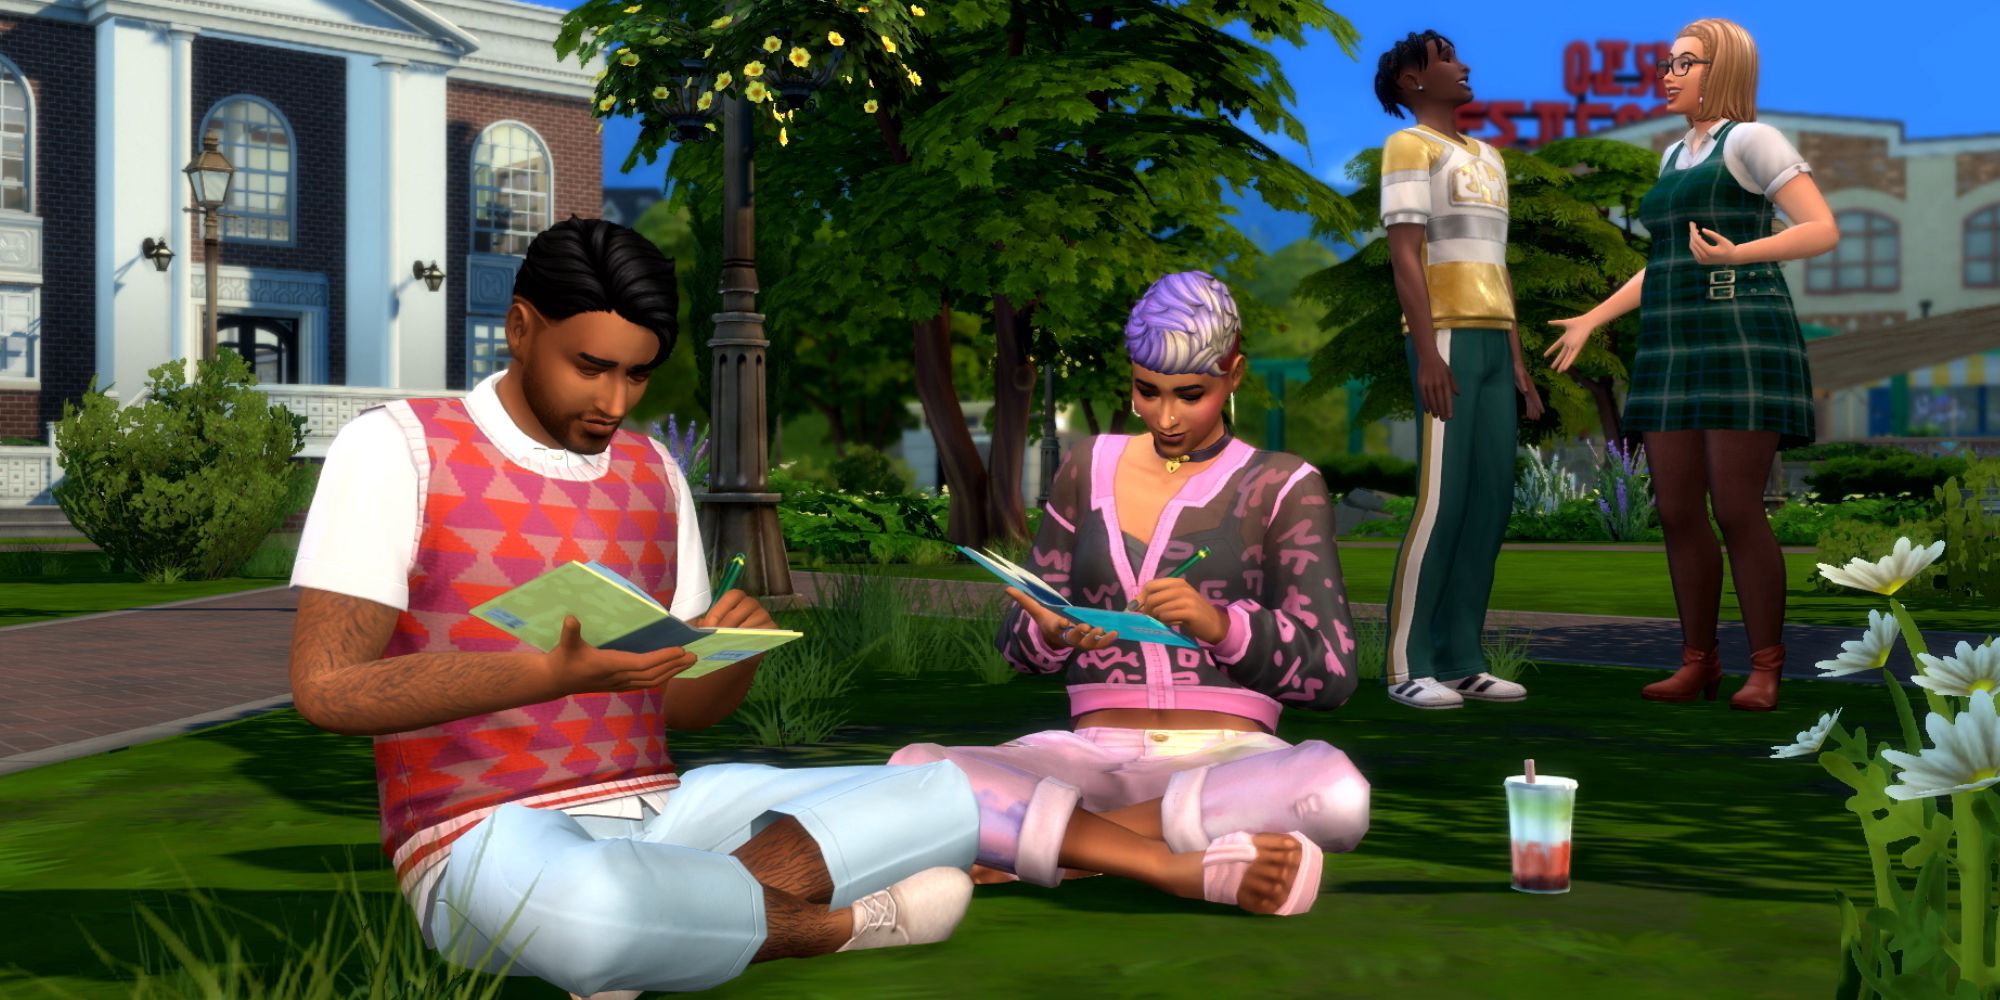 TS4 teens chilling in high school courtyard